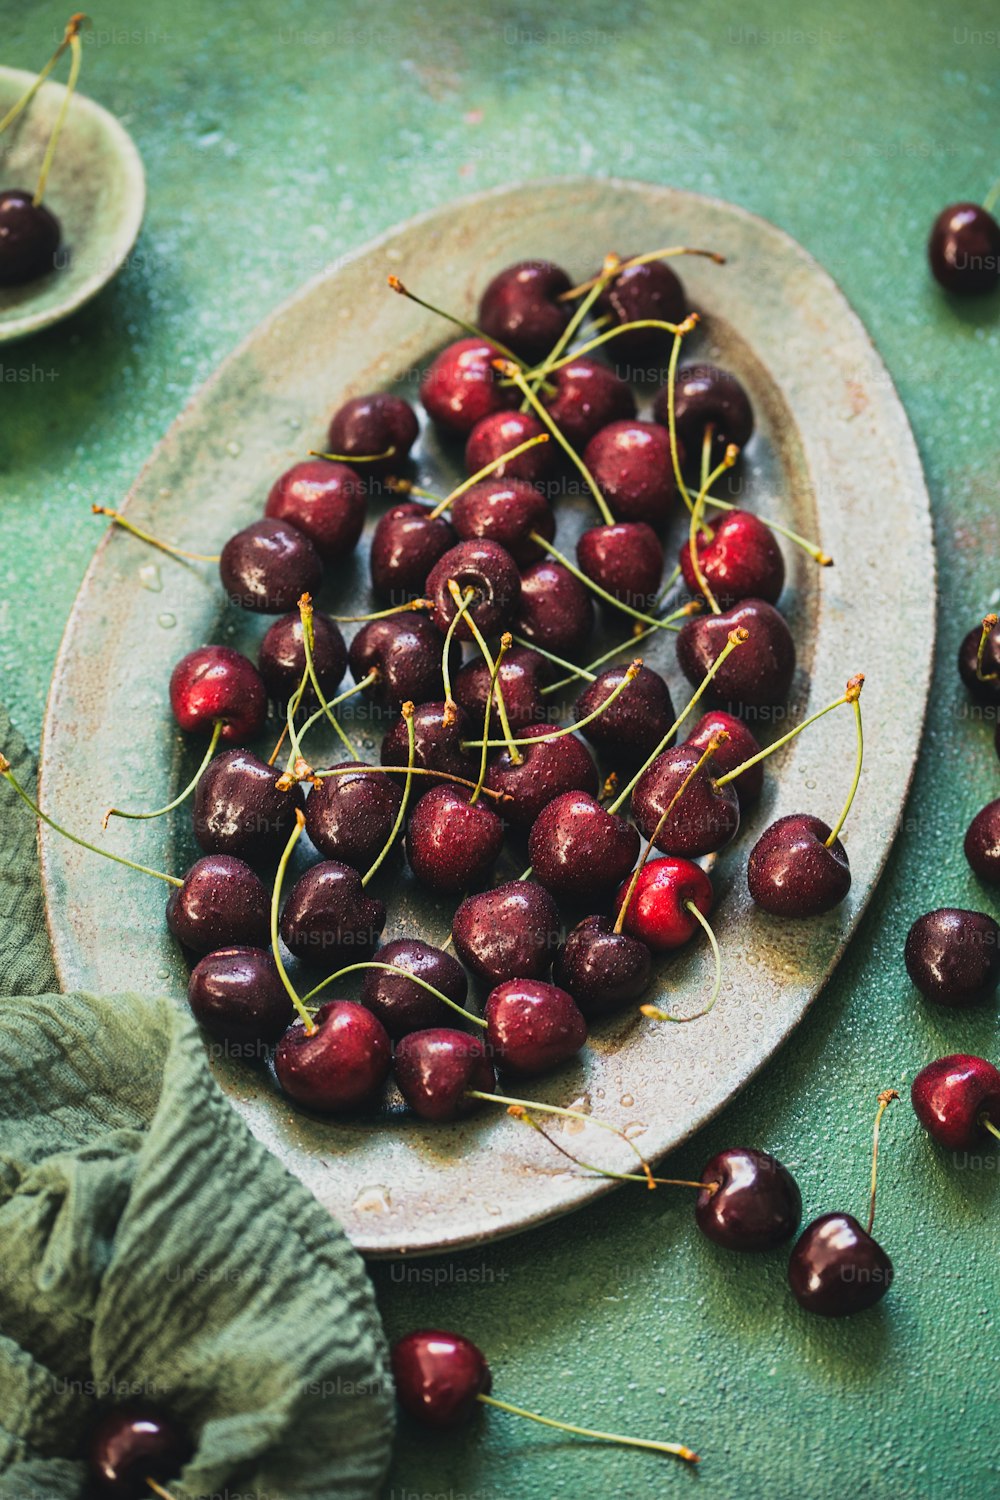 a plate full of cherries on a table